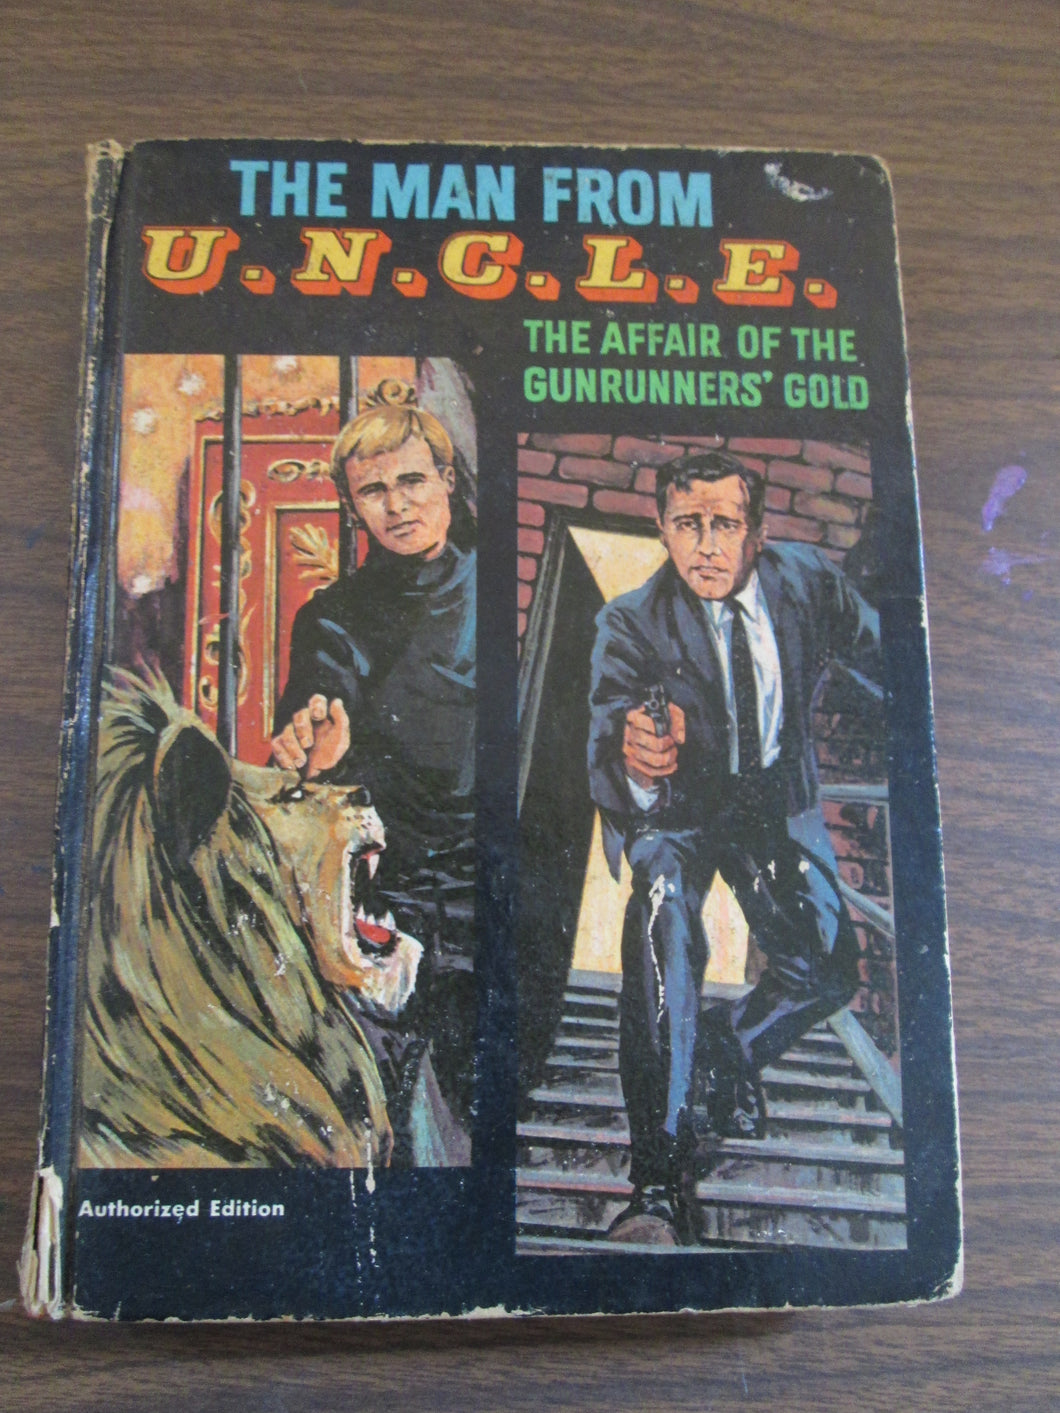 The Man From U.N.C.L.E. The Affair of the Goldrunners' Gold TV Adventure Book by Brandon Keith HC 1967